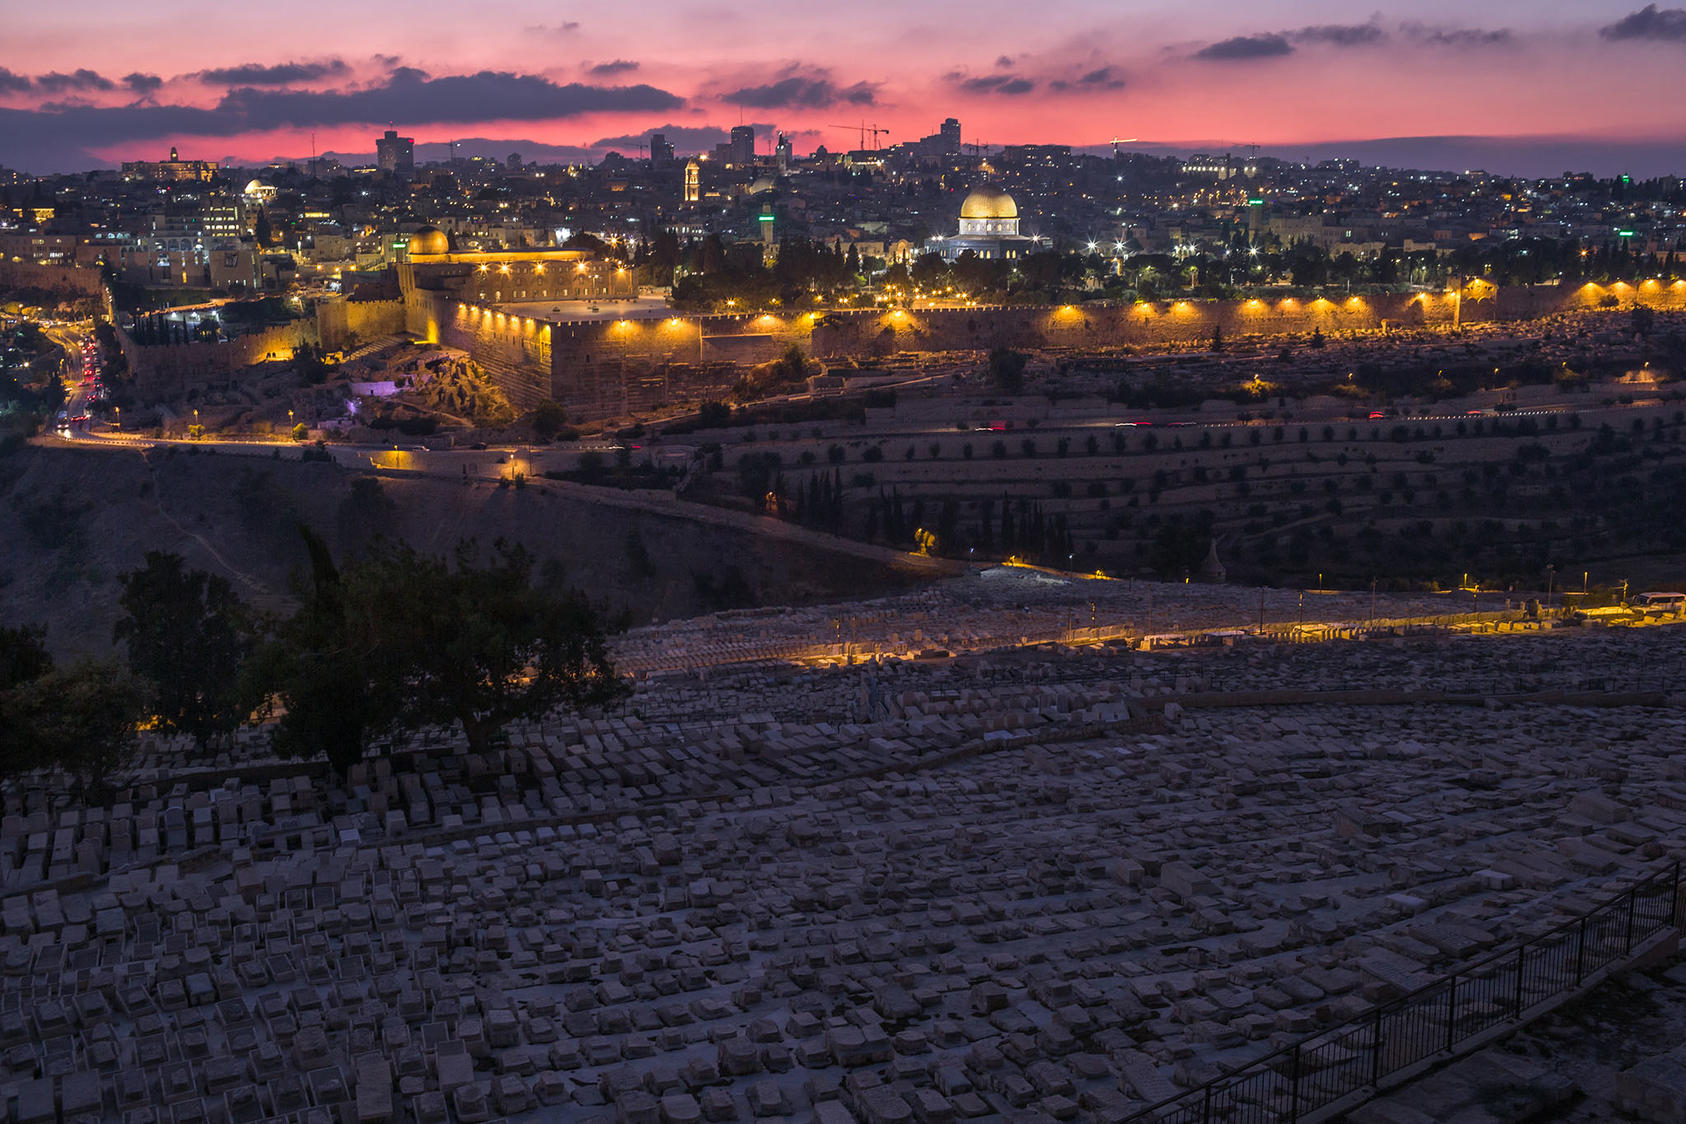 A view of the Al-Aqsa Mosque, and the Old City of Jerusalem, from the Mount of Olives on Sept. 13, 2019. (Mauricio Lima/The New York Times) 